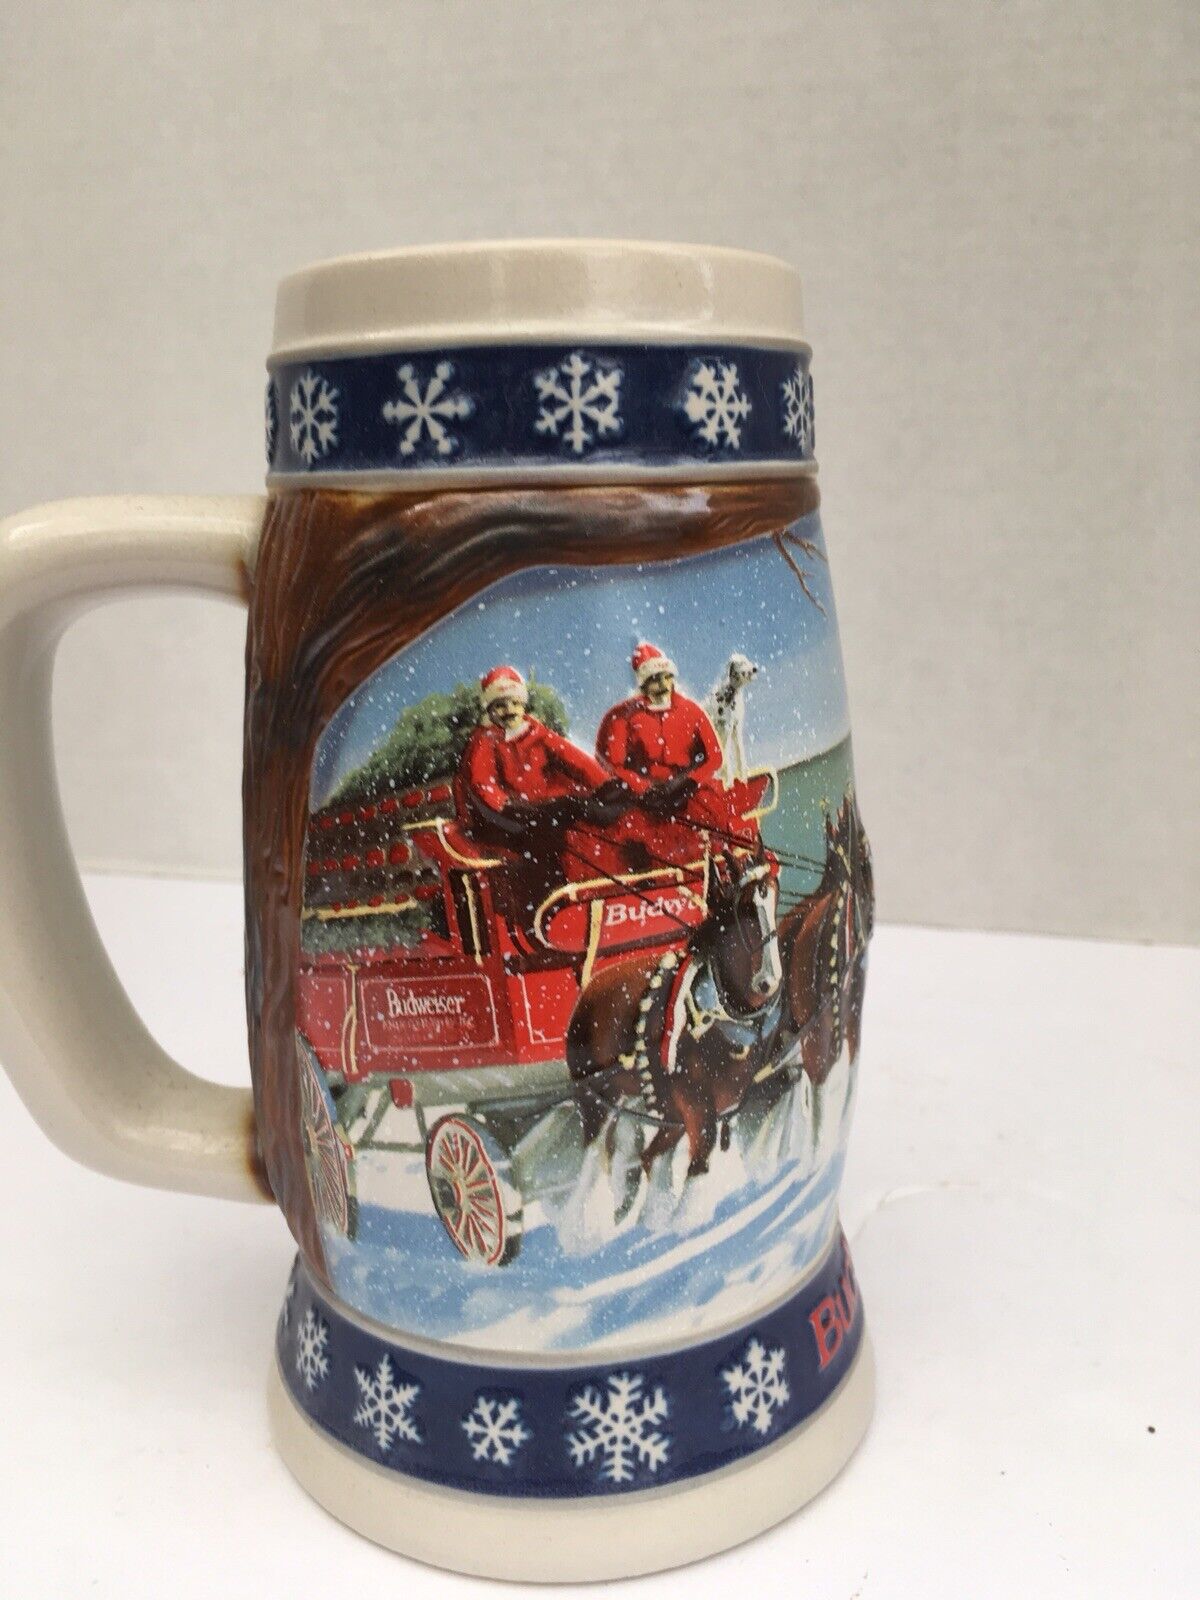 1995 Anheuser Busch Budweiser Clydesdales Holiday Stein Lighting The Way Home